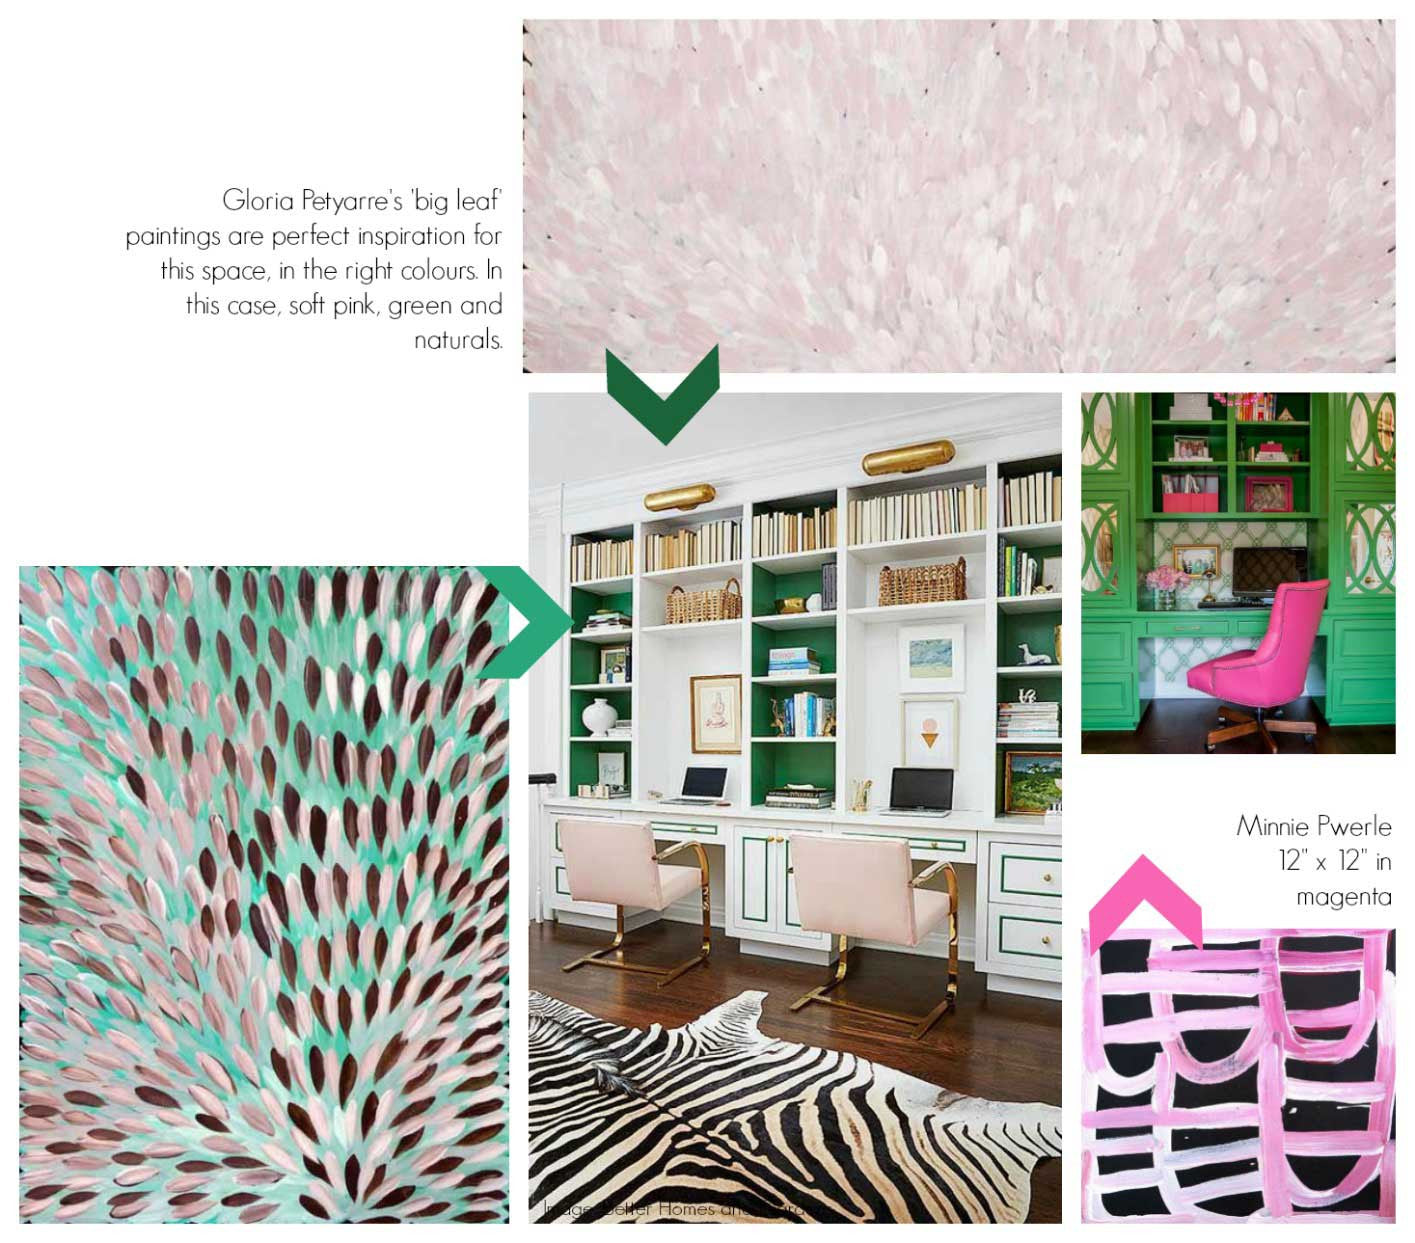 Decorating with green and pink